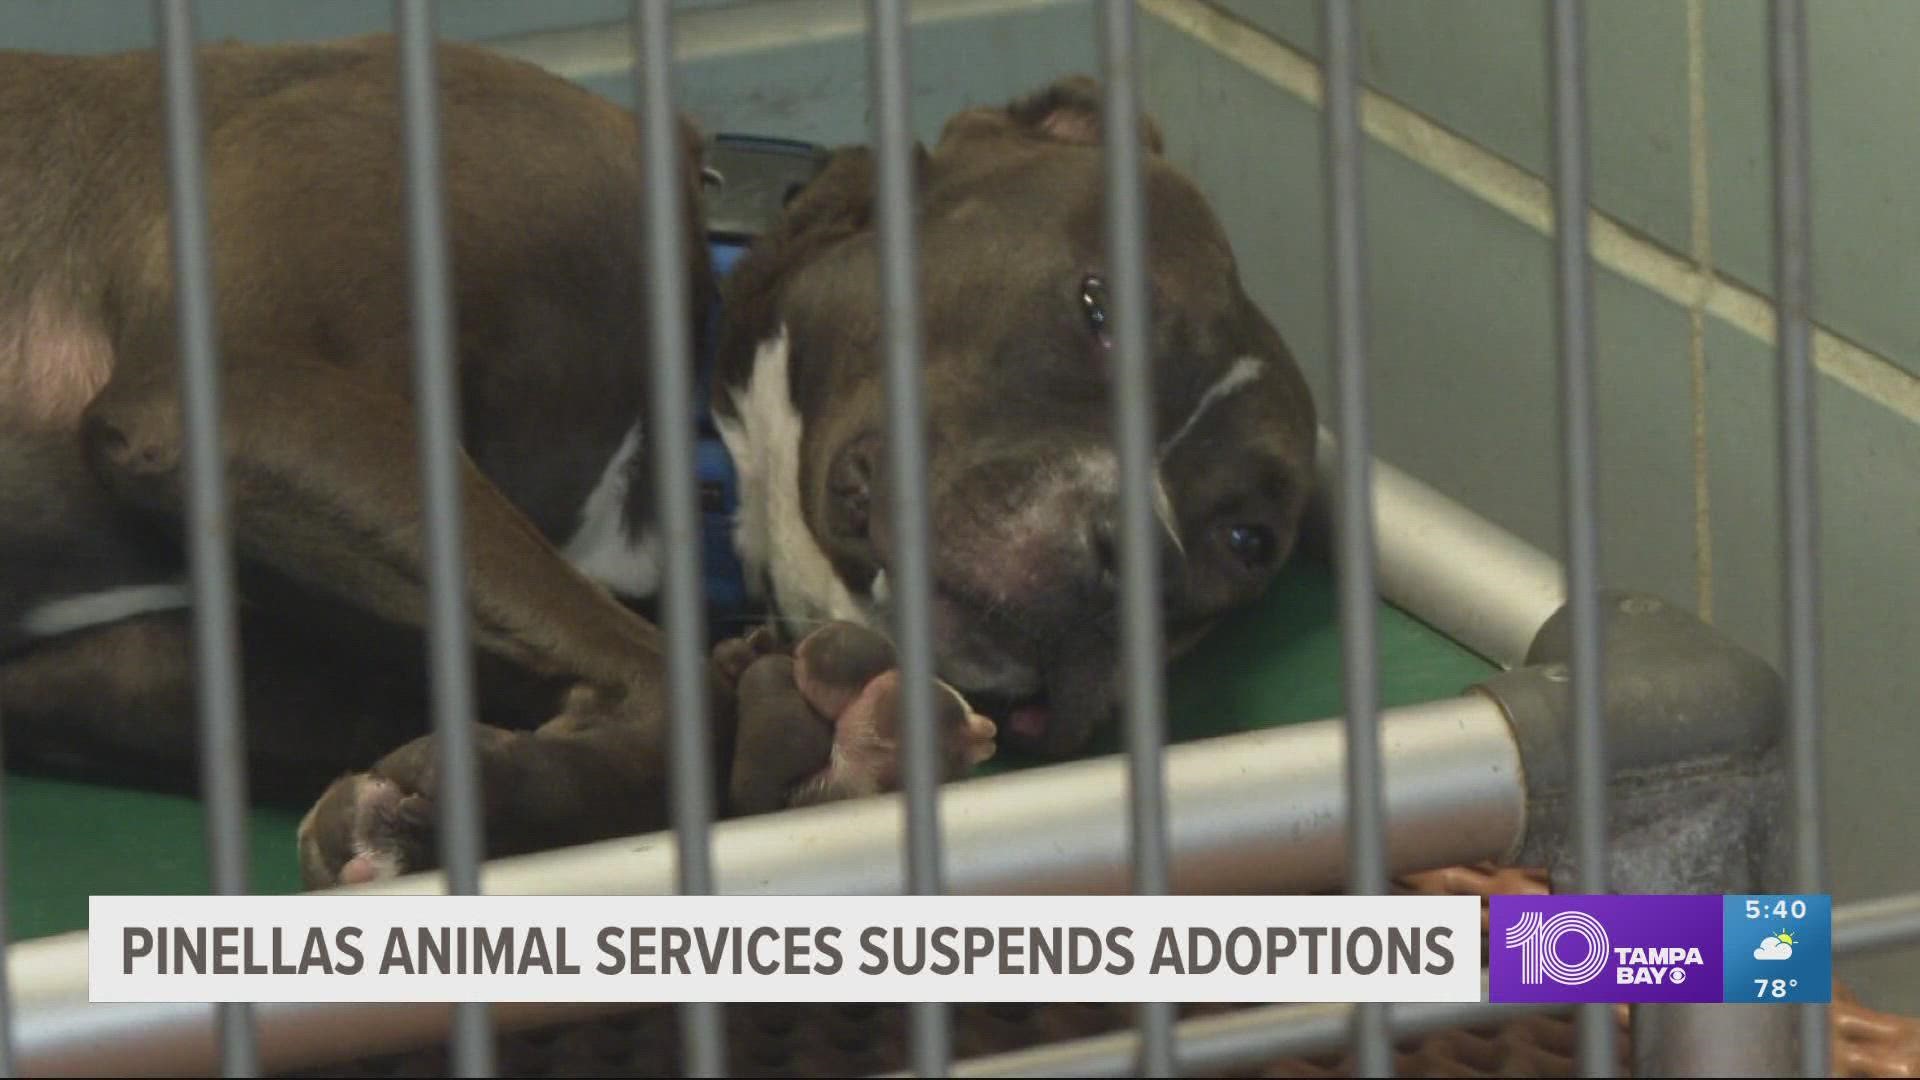 Animal shelters across Florida and the country are dealing with this highly contagious virus that's affecting dogs.